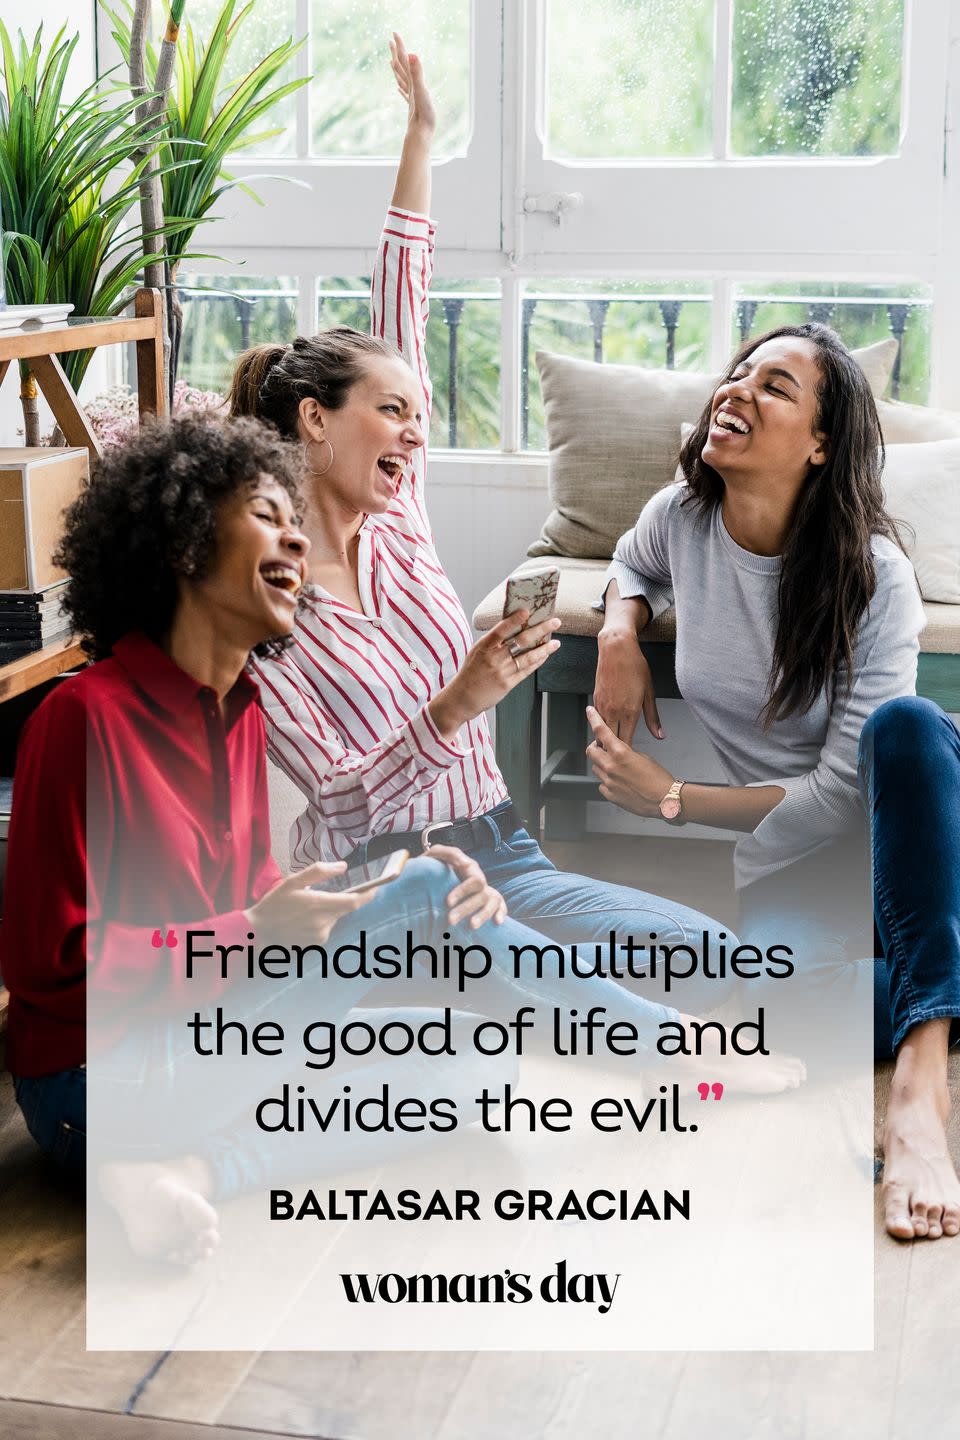 <p>“Friendship multiplies the good of life and divides the evil.”</p>